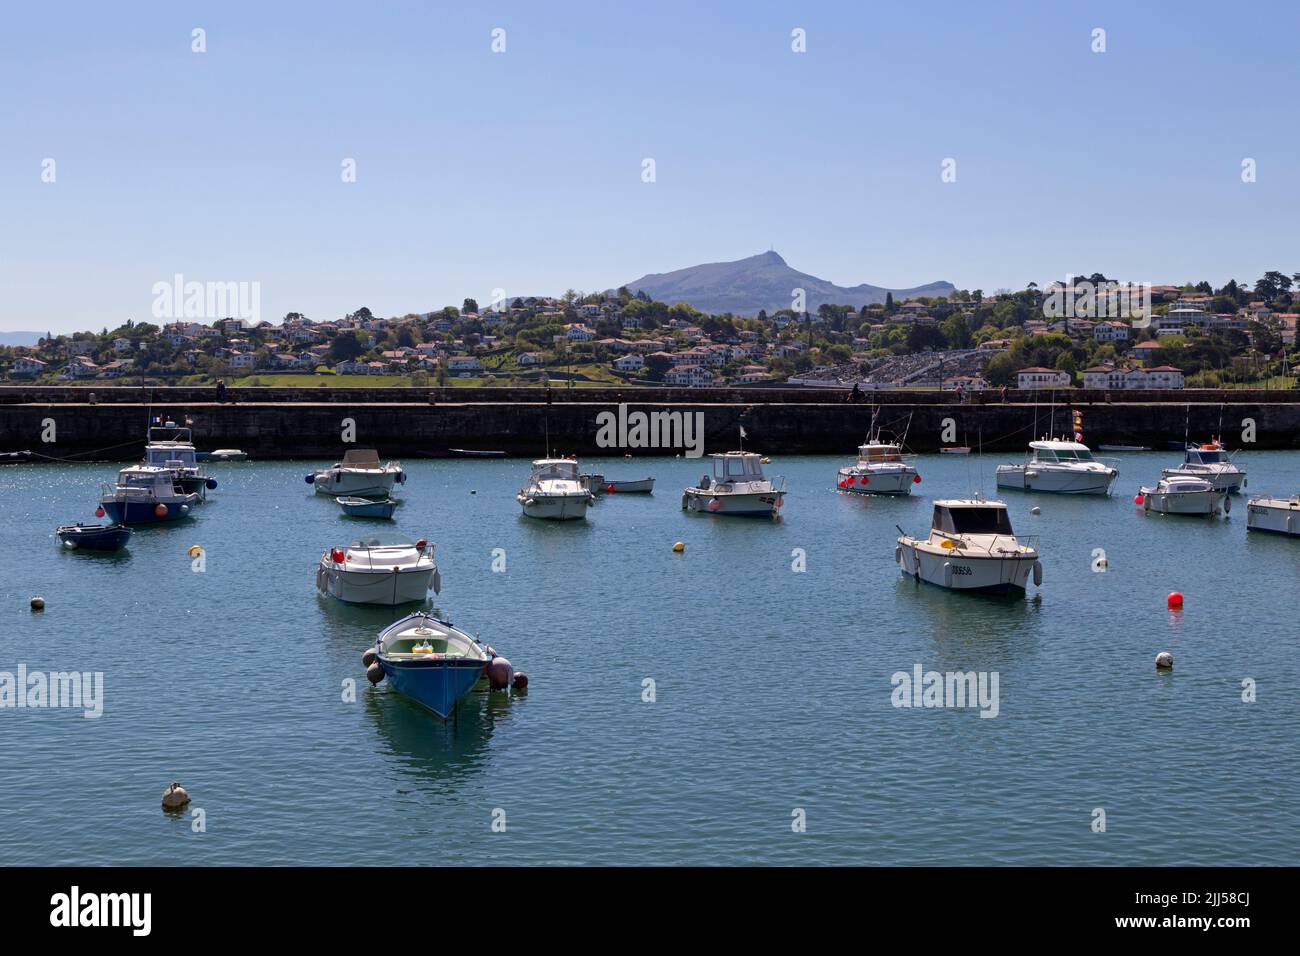 The Marina of Ciboure. In the background the mountain of La Rhune, Pyrenees-Atlantiques, France Stock Photo